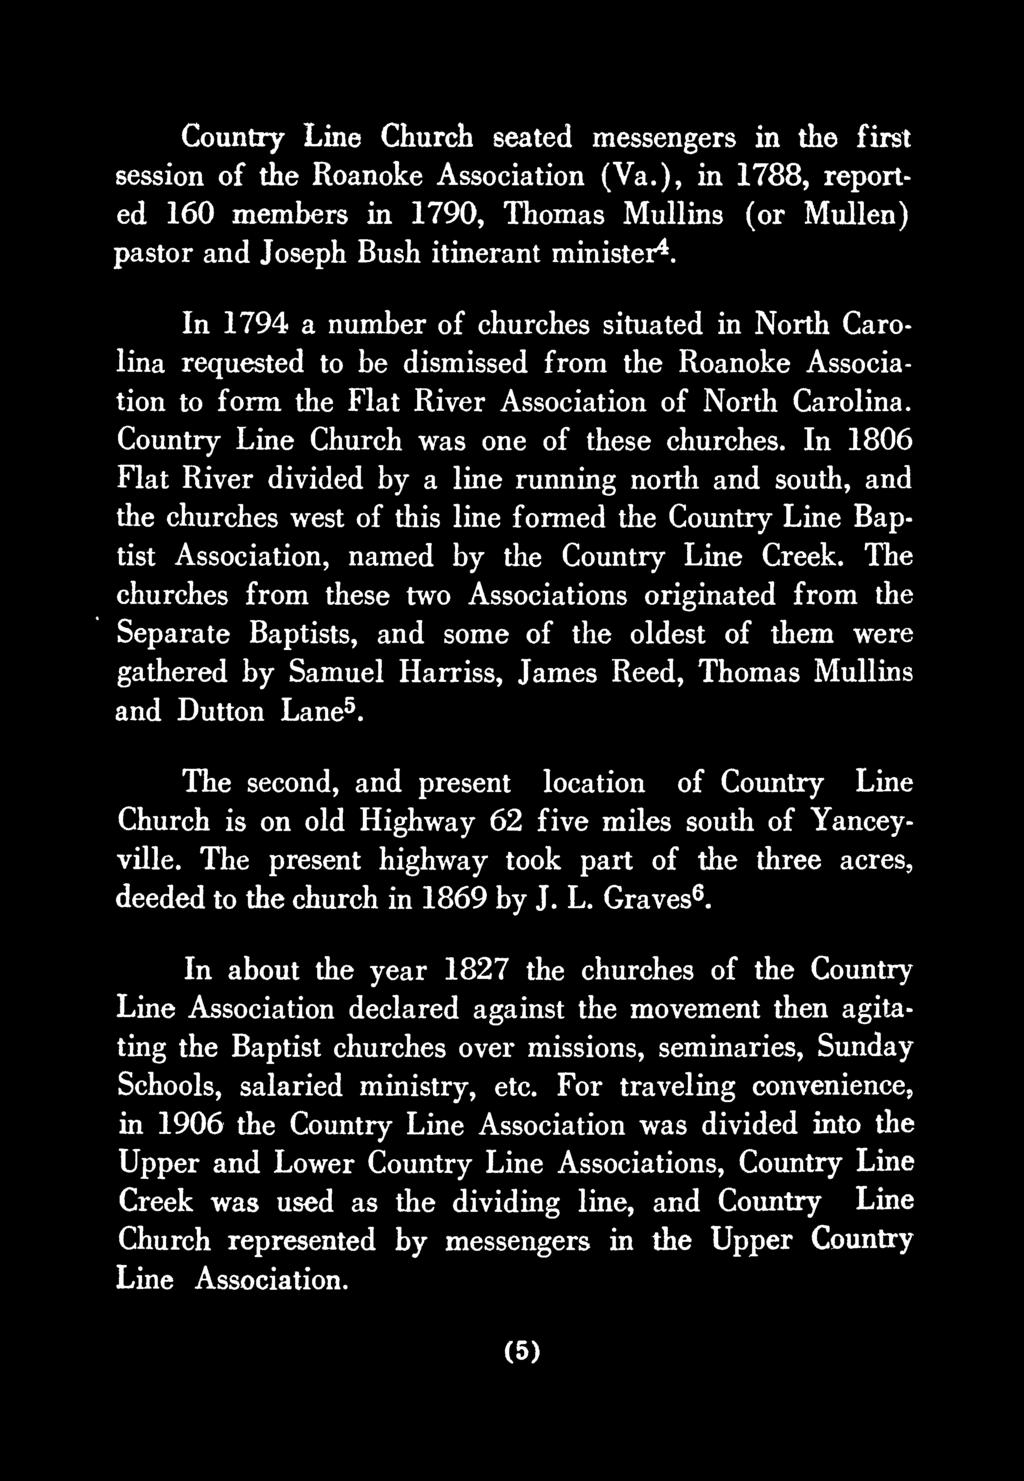 In 1806 Flat River divided by a line running north and south, and the churches west of this line formed the Country Line Baptist Association, named by the Country Line Creek.